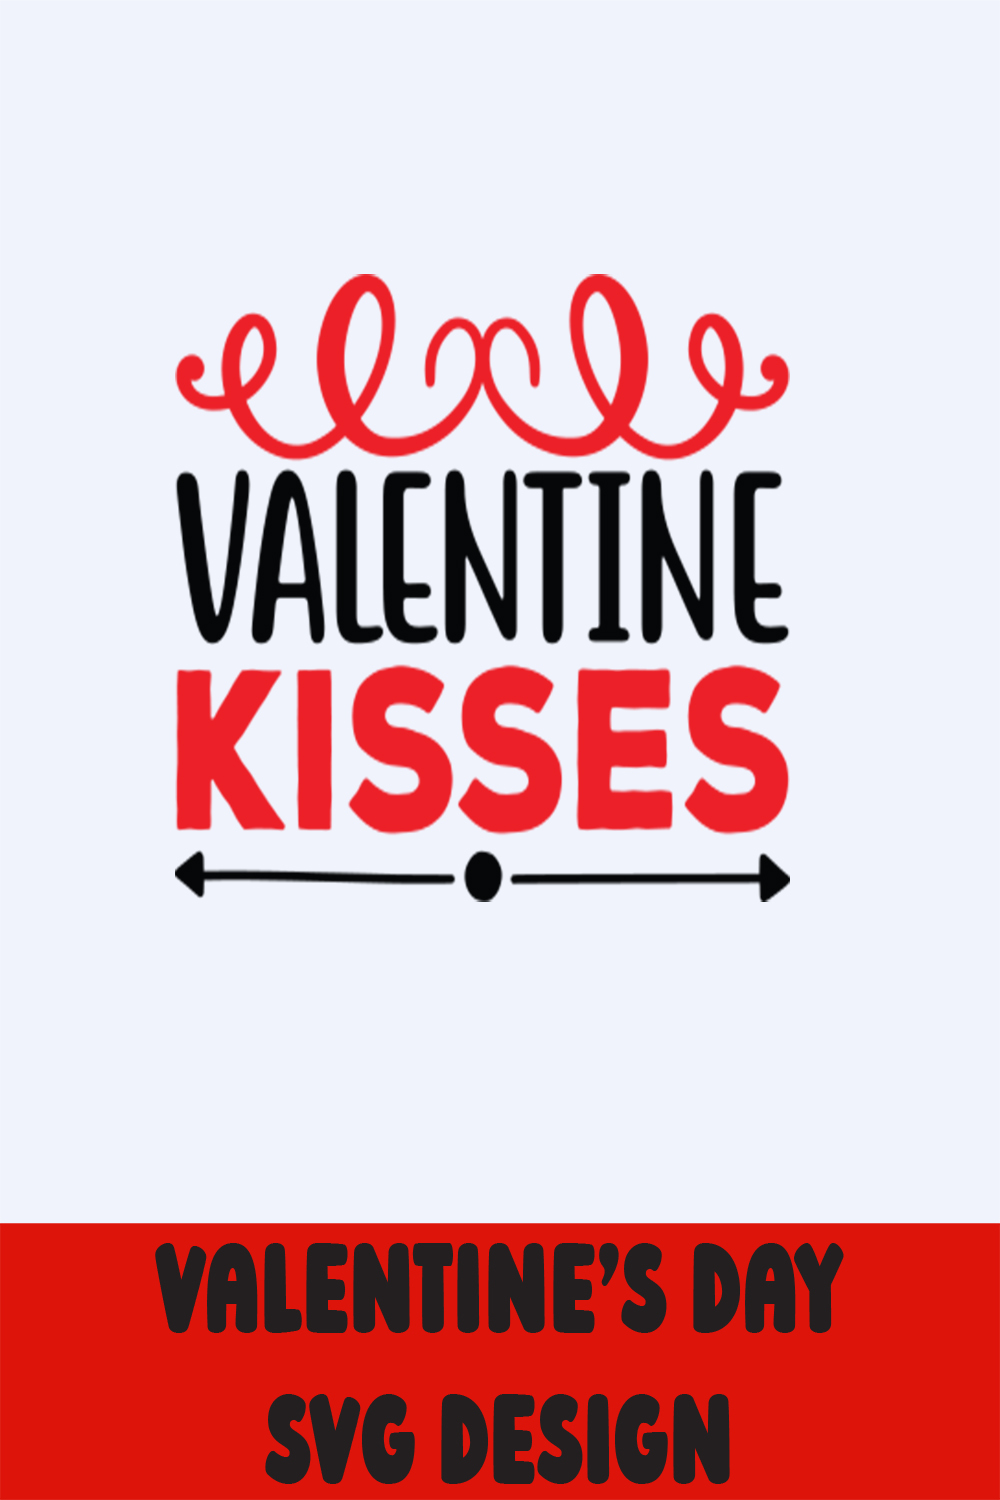 Image with a wonderful inscription for printing Valentine Kisses